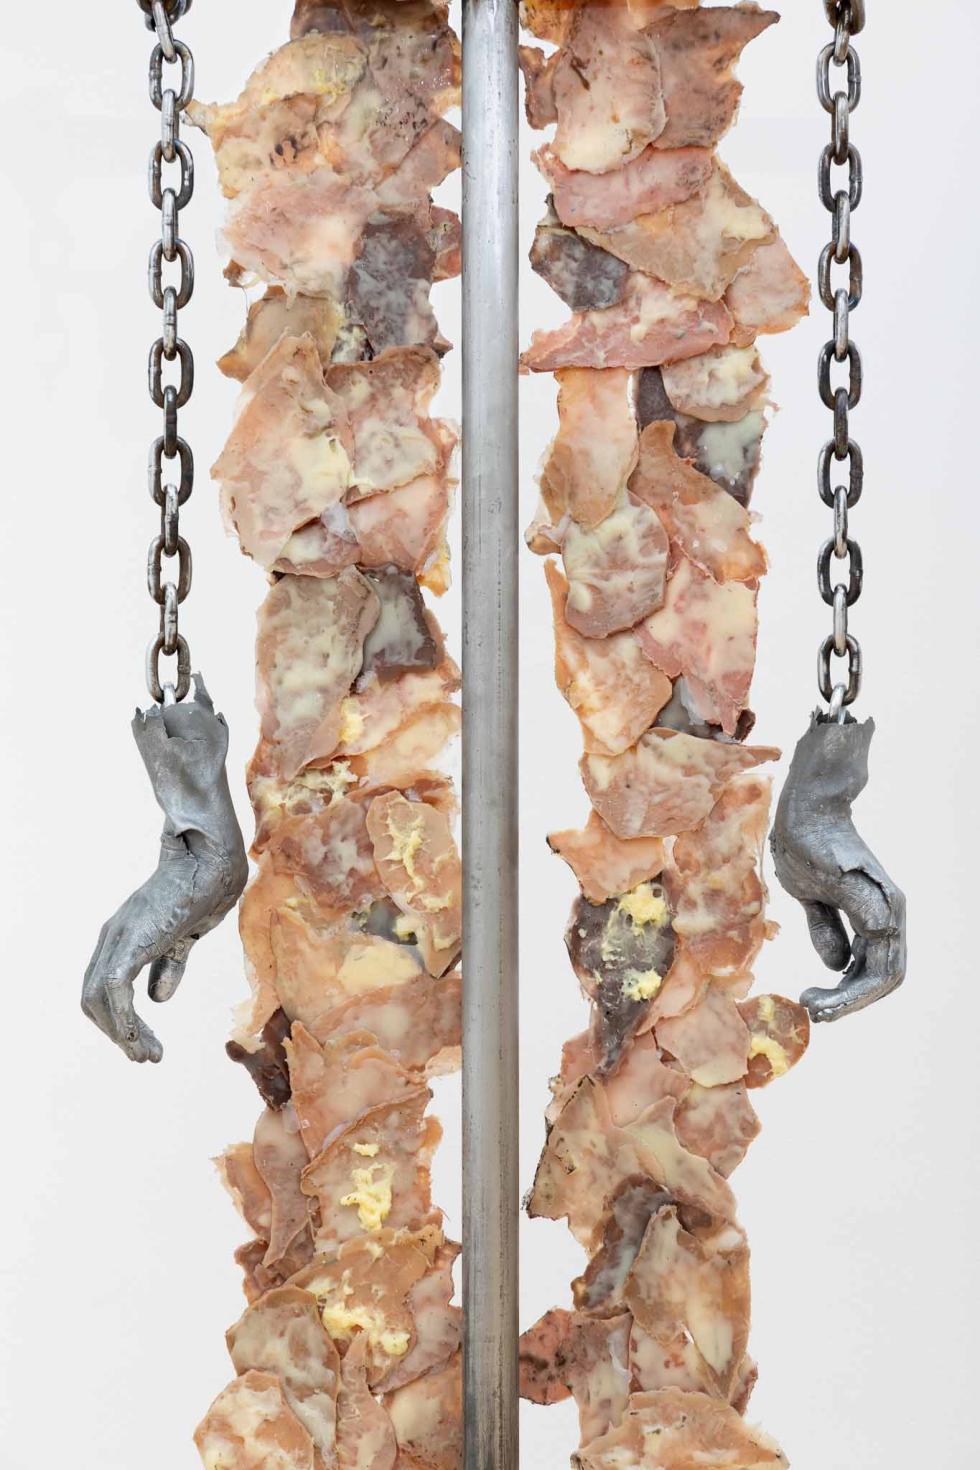 Steel pole with two steel casted hands hanging on either side on a chain with silicone chicken skins draped around it.